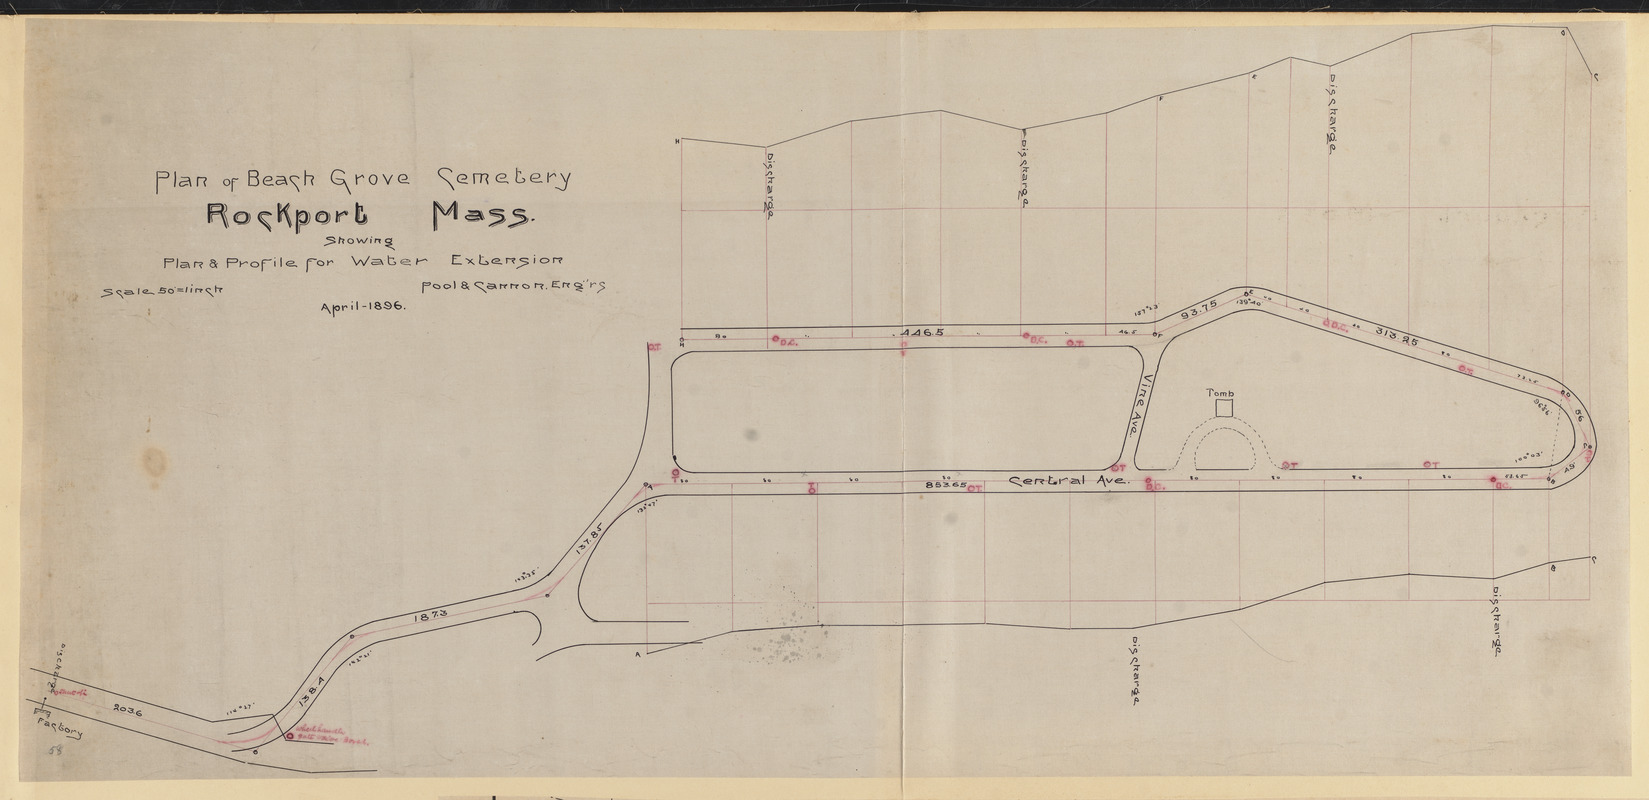 Plan of Beach Grove Cemetery, Rockport, Mass. showing plan & profile for water extension